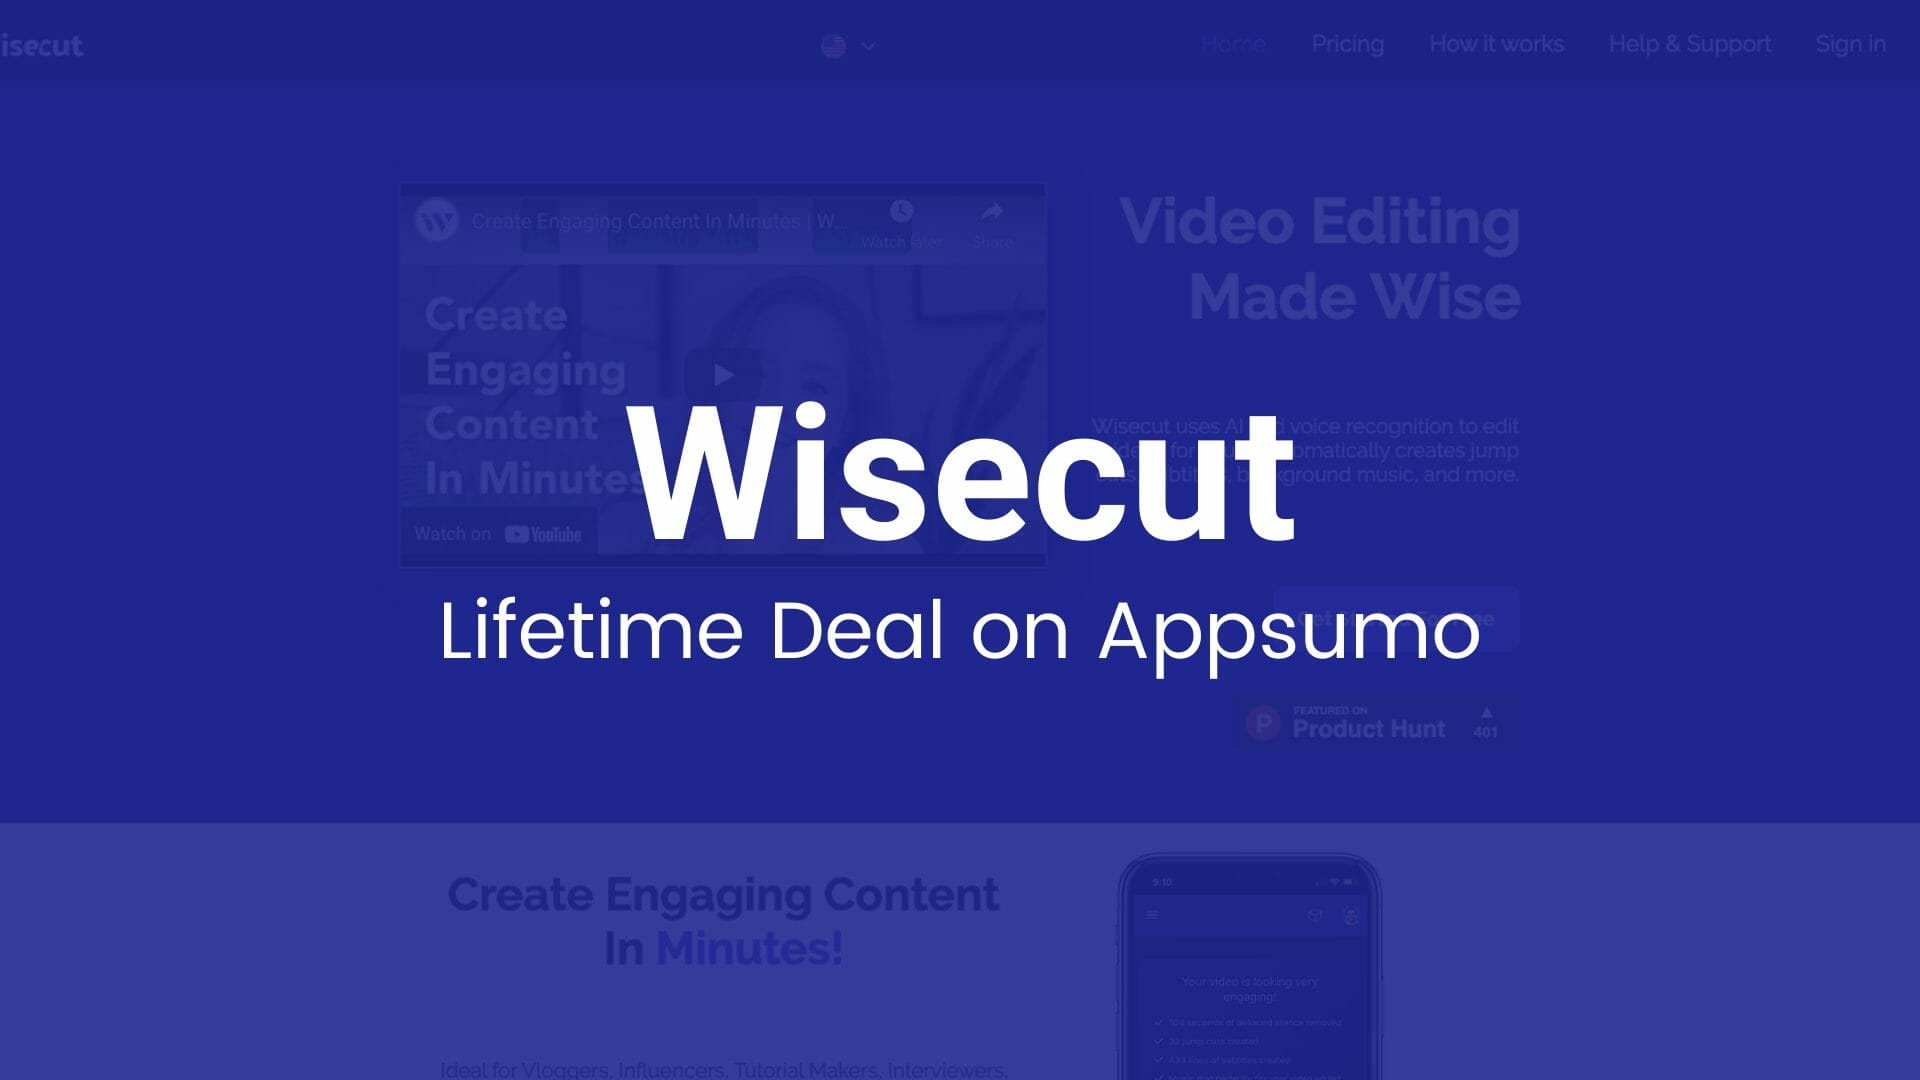 Wisecut: Make Video Editing Easier with AI and Voice Recognition